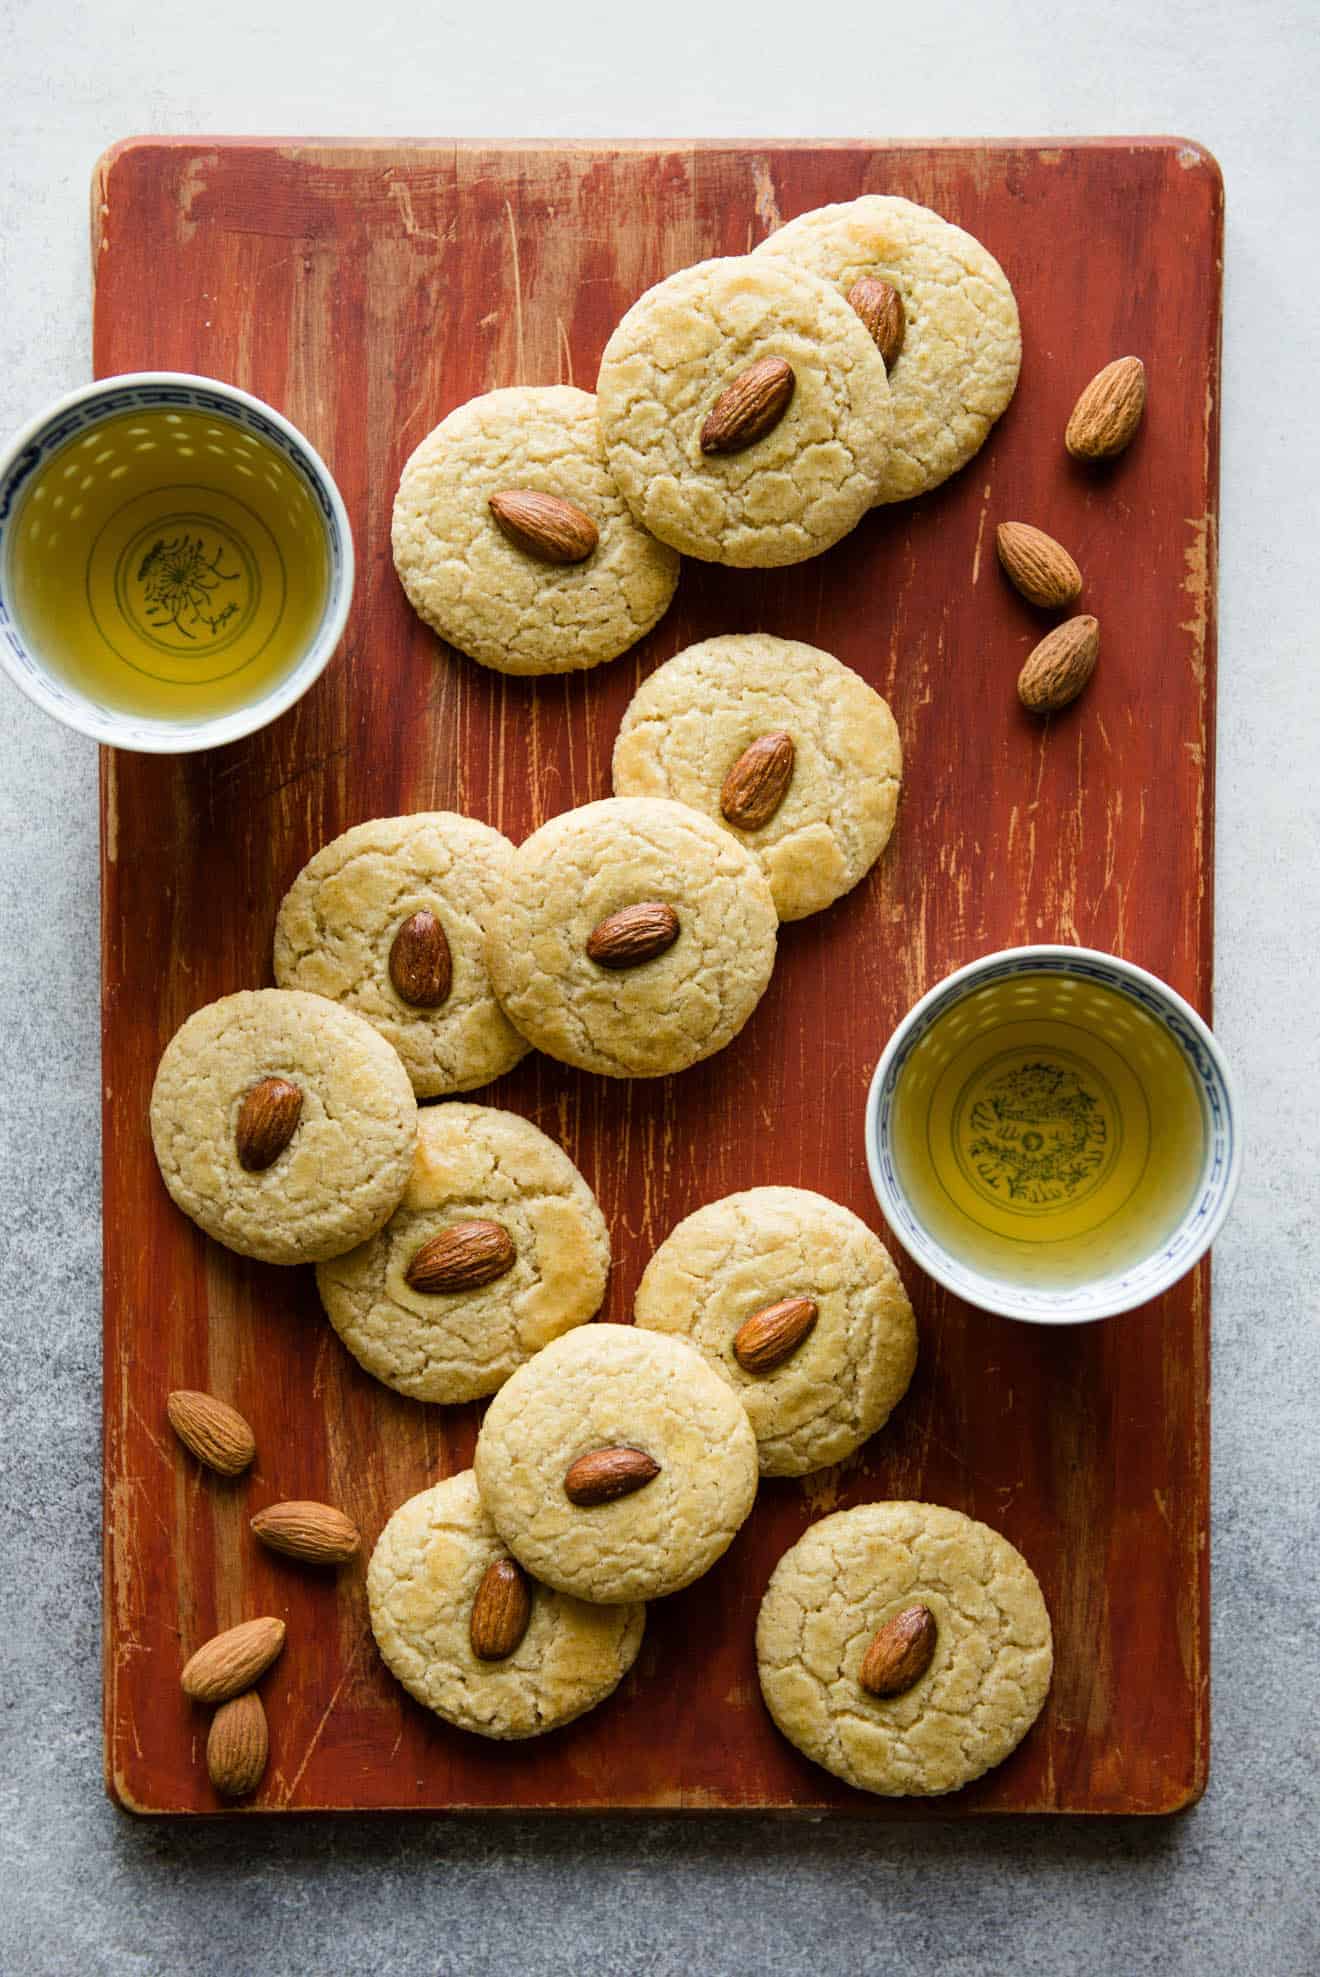 Gluten-Free Chinese Almond Cookies - great for the holiday season or for any party! #dessert #glutenfree